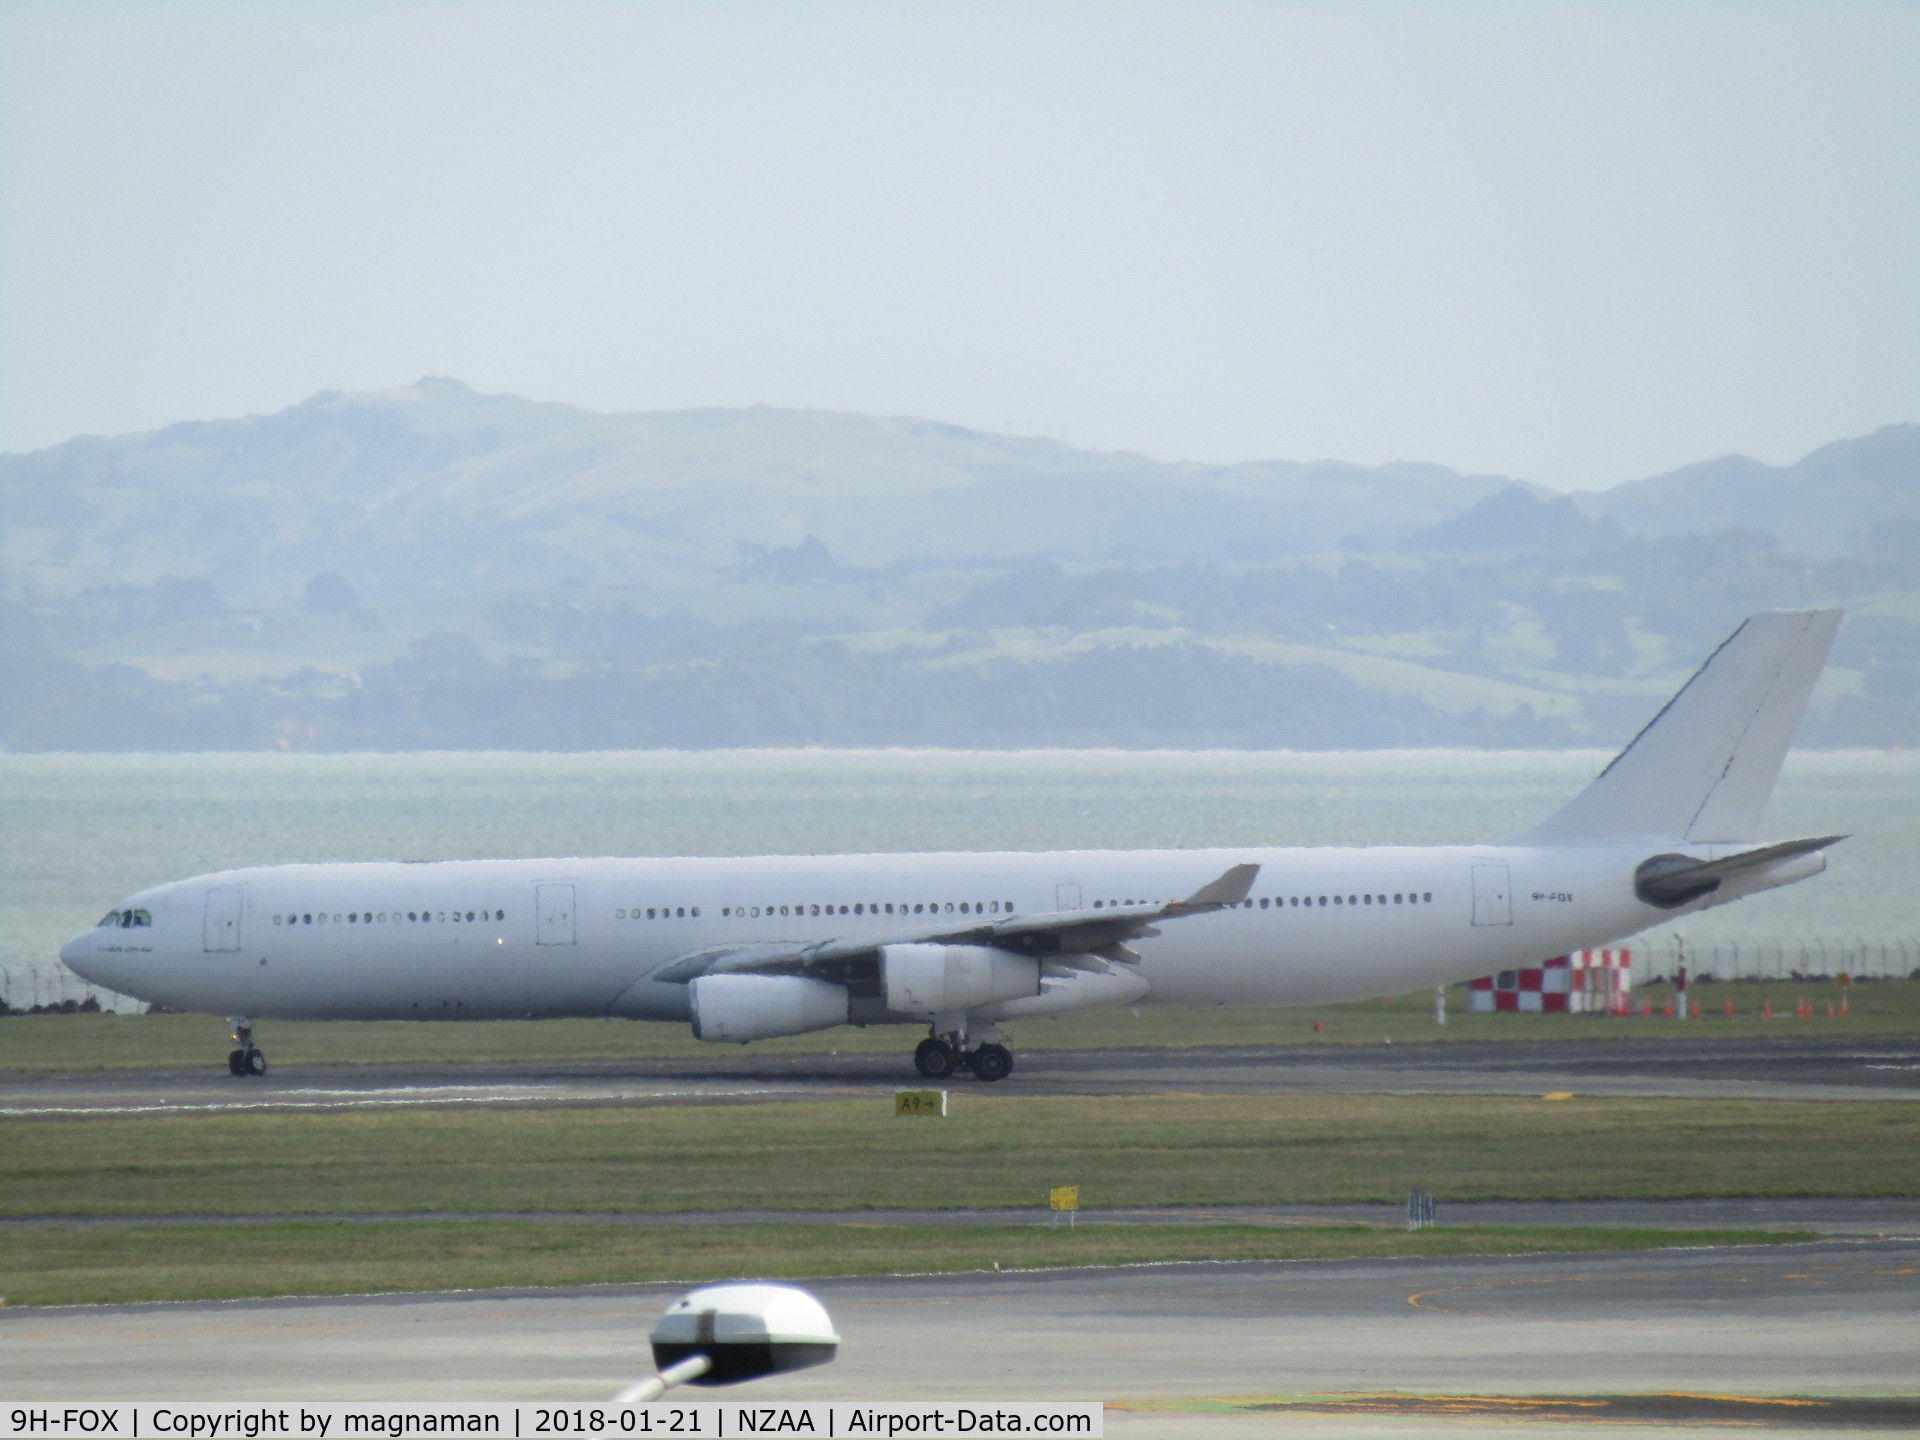 9H-FOX, 1997 Airbus A340-313 C/N 185, lining up for another sydney flight for Air NZ